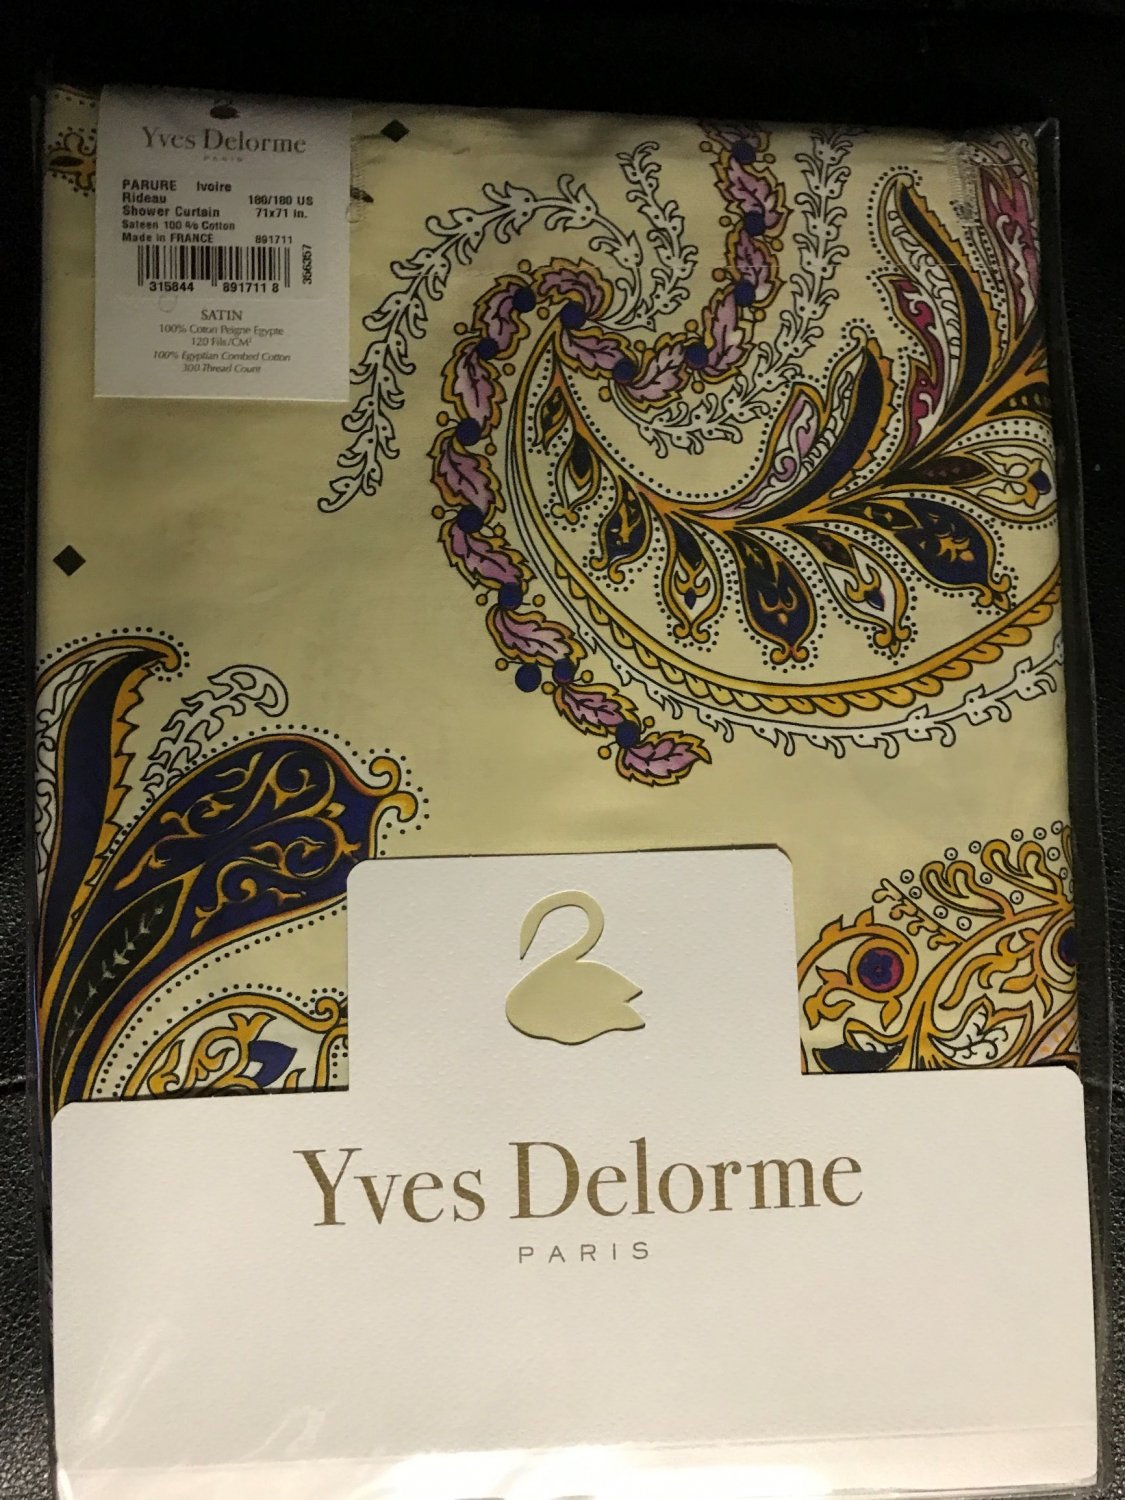 Yves Delorme Parure Ivorie Paisley Feather Multicolor Shower Curtain ...